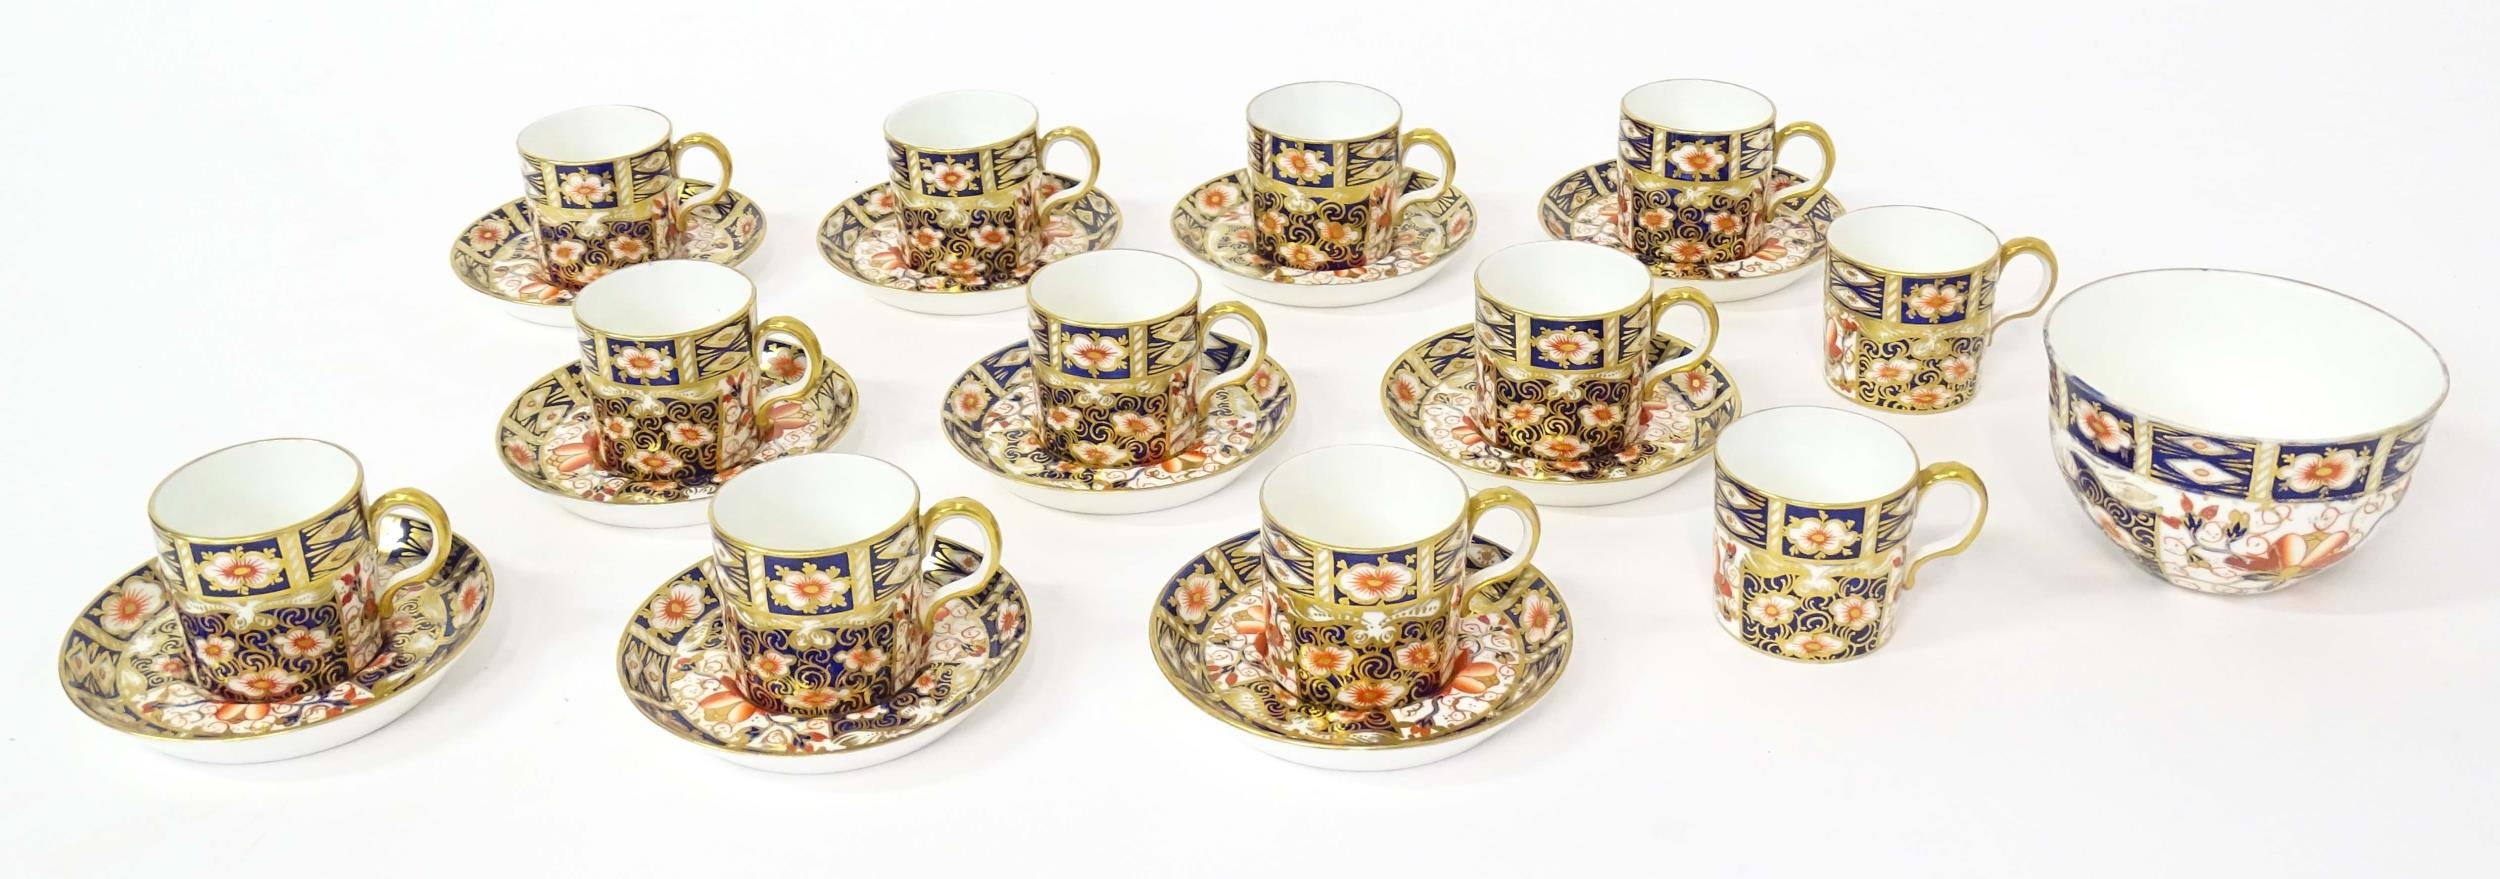 A quantity of Royal Crown Derby coffee cups, saucers, and a sugar bowl decorated in the Imari